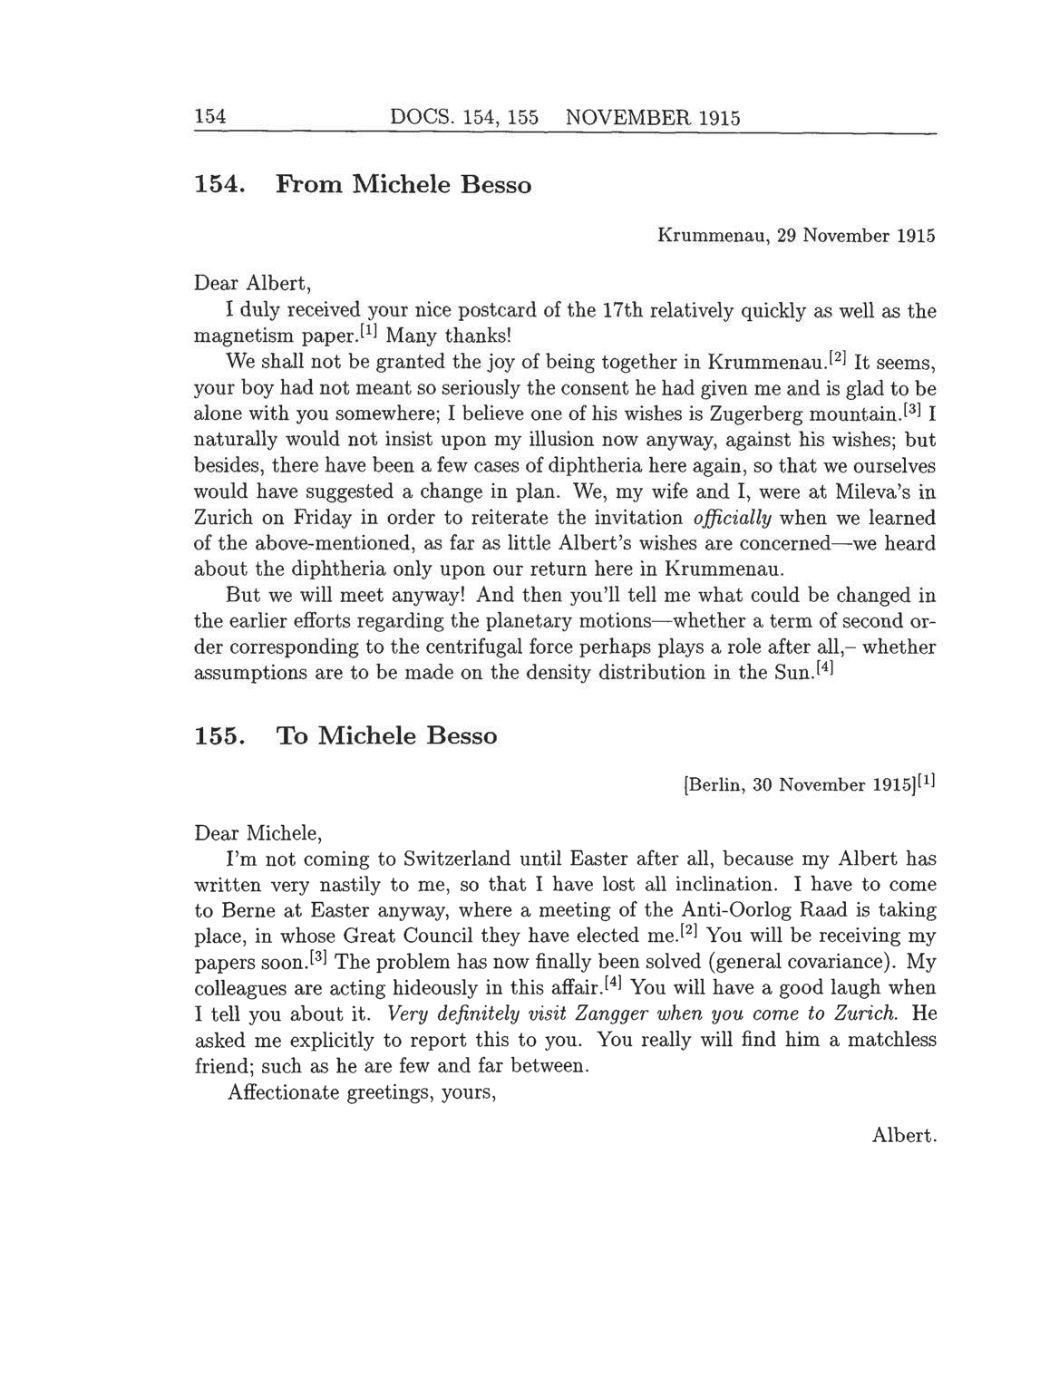 Volume 8: The Berlin Years: Correspondence, 1914-1918 (English translation supplement) page 154